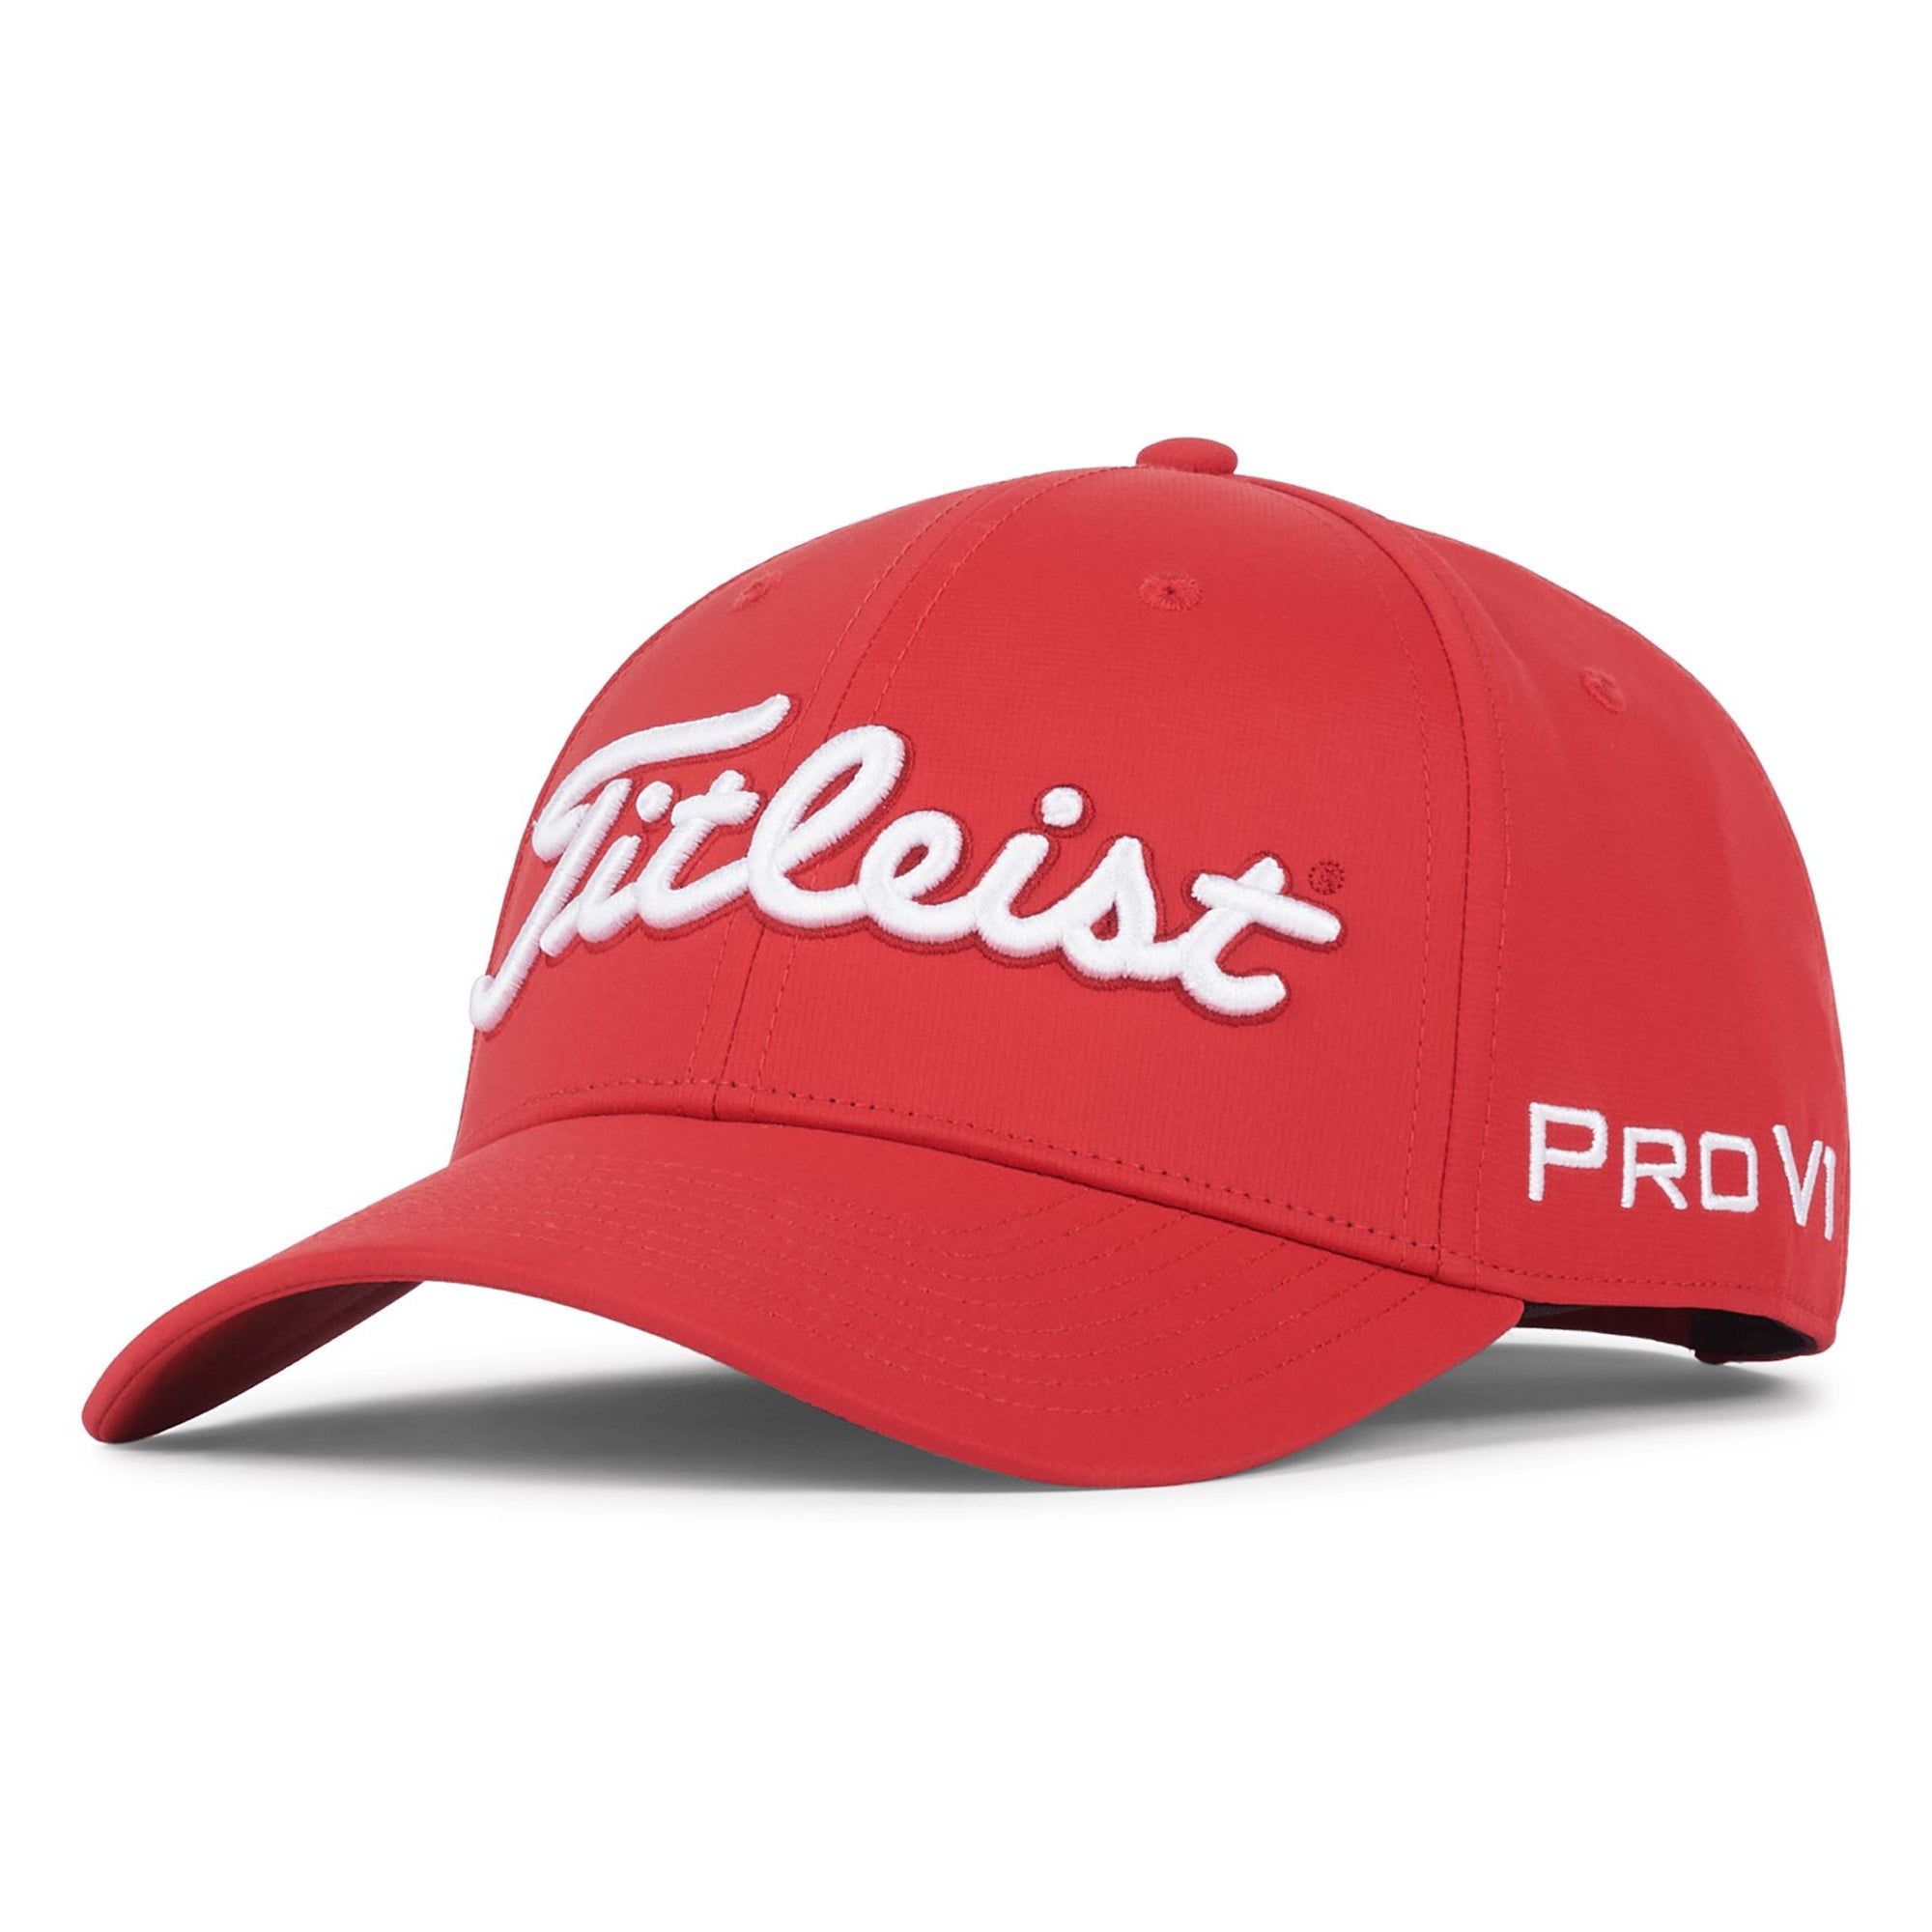 titleist-tour-performance-cap-th24atpe-61-red-white-function18